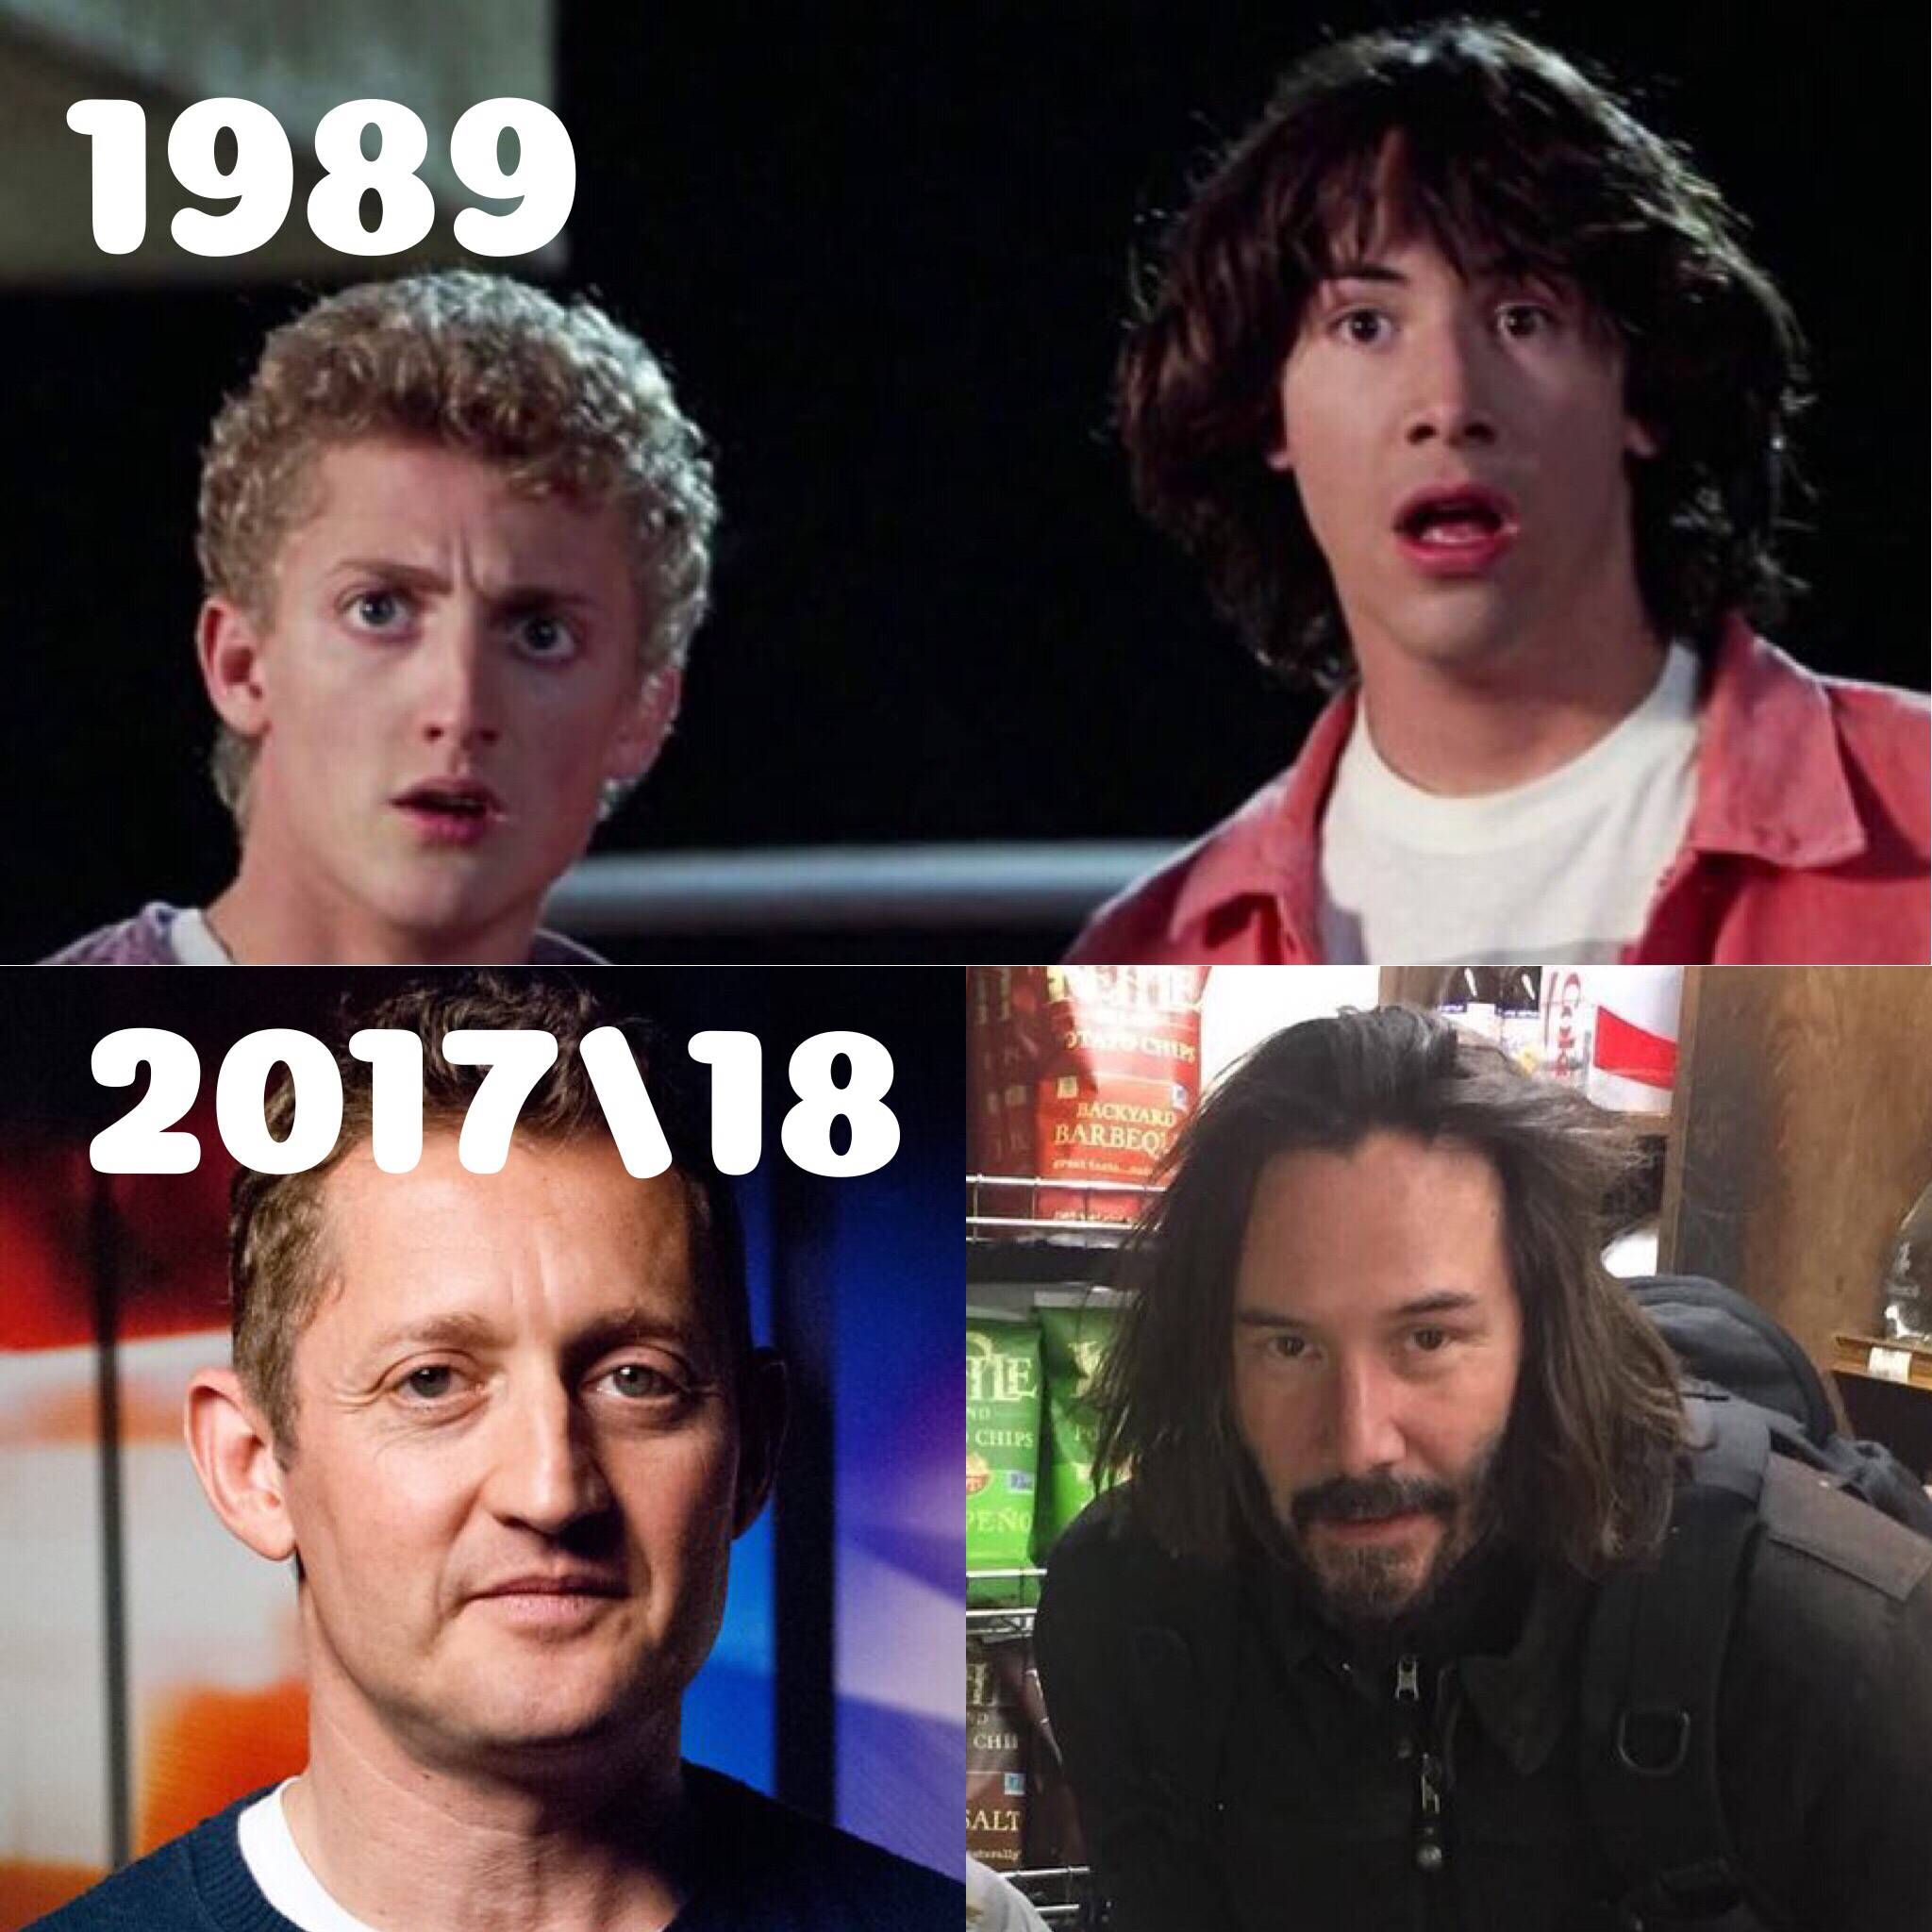 I still don’t know why they don’t make another Bill and Ted’s adventure.